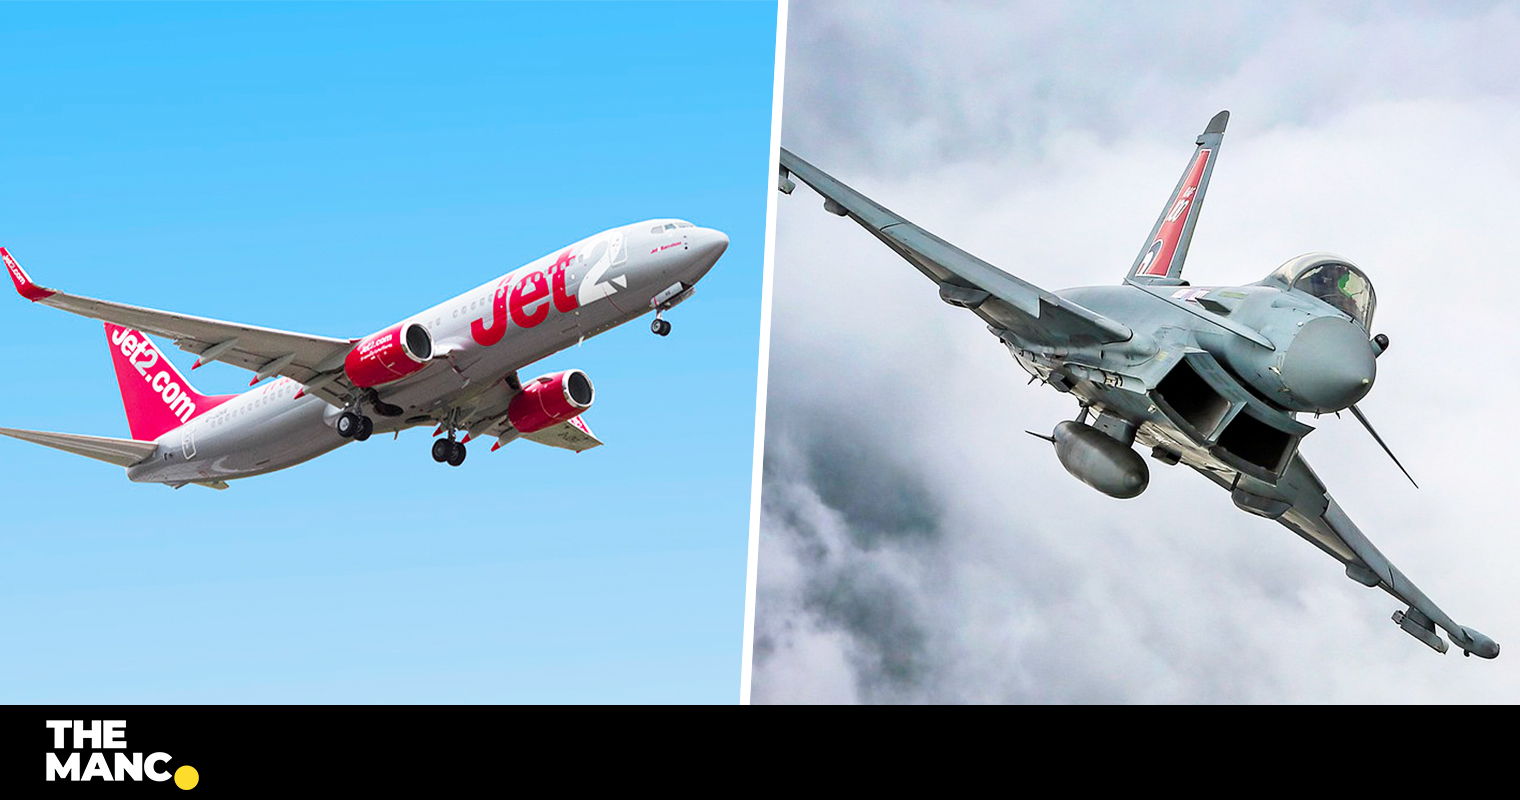 Manchester-bound Jet2 plane escorted by RAF jets following security threat